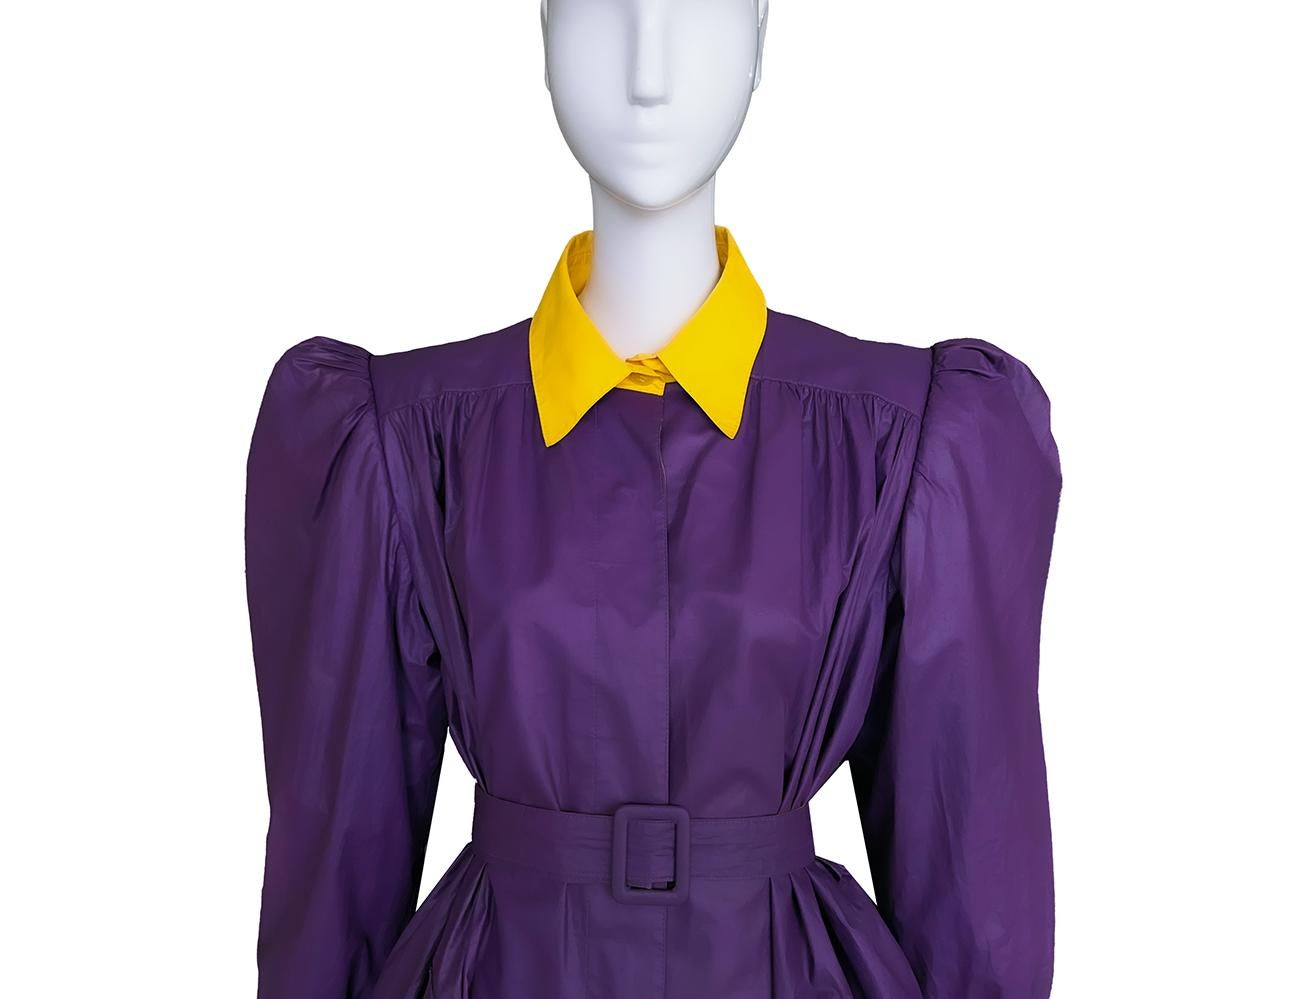 Rare Valentino Raincoat Vintage Trench Coat Purple Violet Yellow In Good Condition For Sale In Berlin, BE